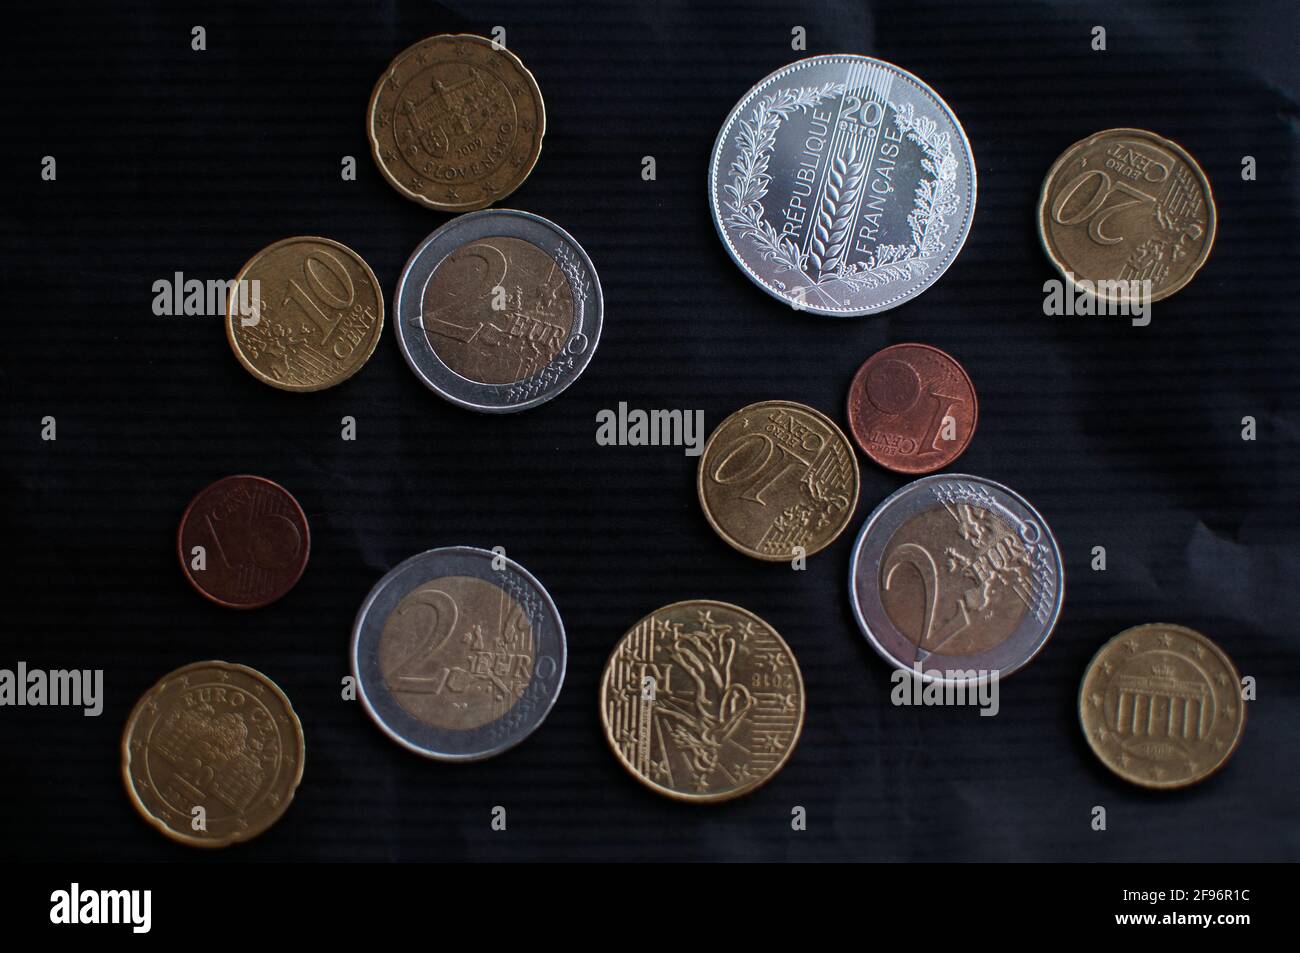 Euros currency-silver currency-Currency Collection-Monnaie de Paris-Euros Argent Stock Photo